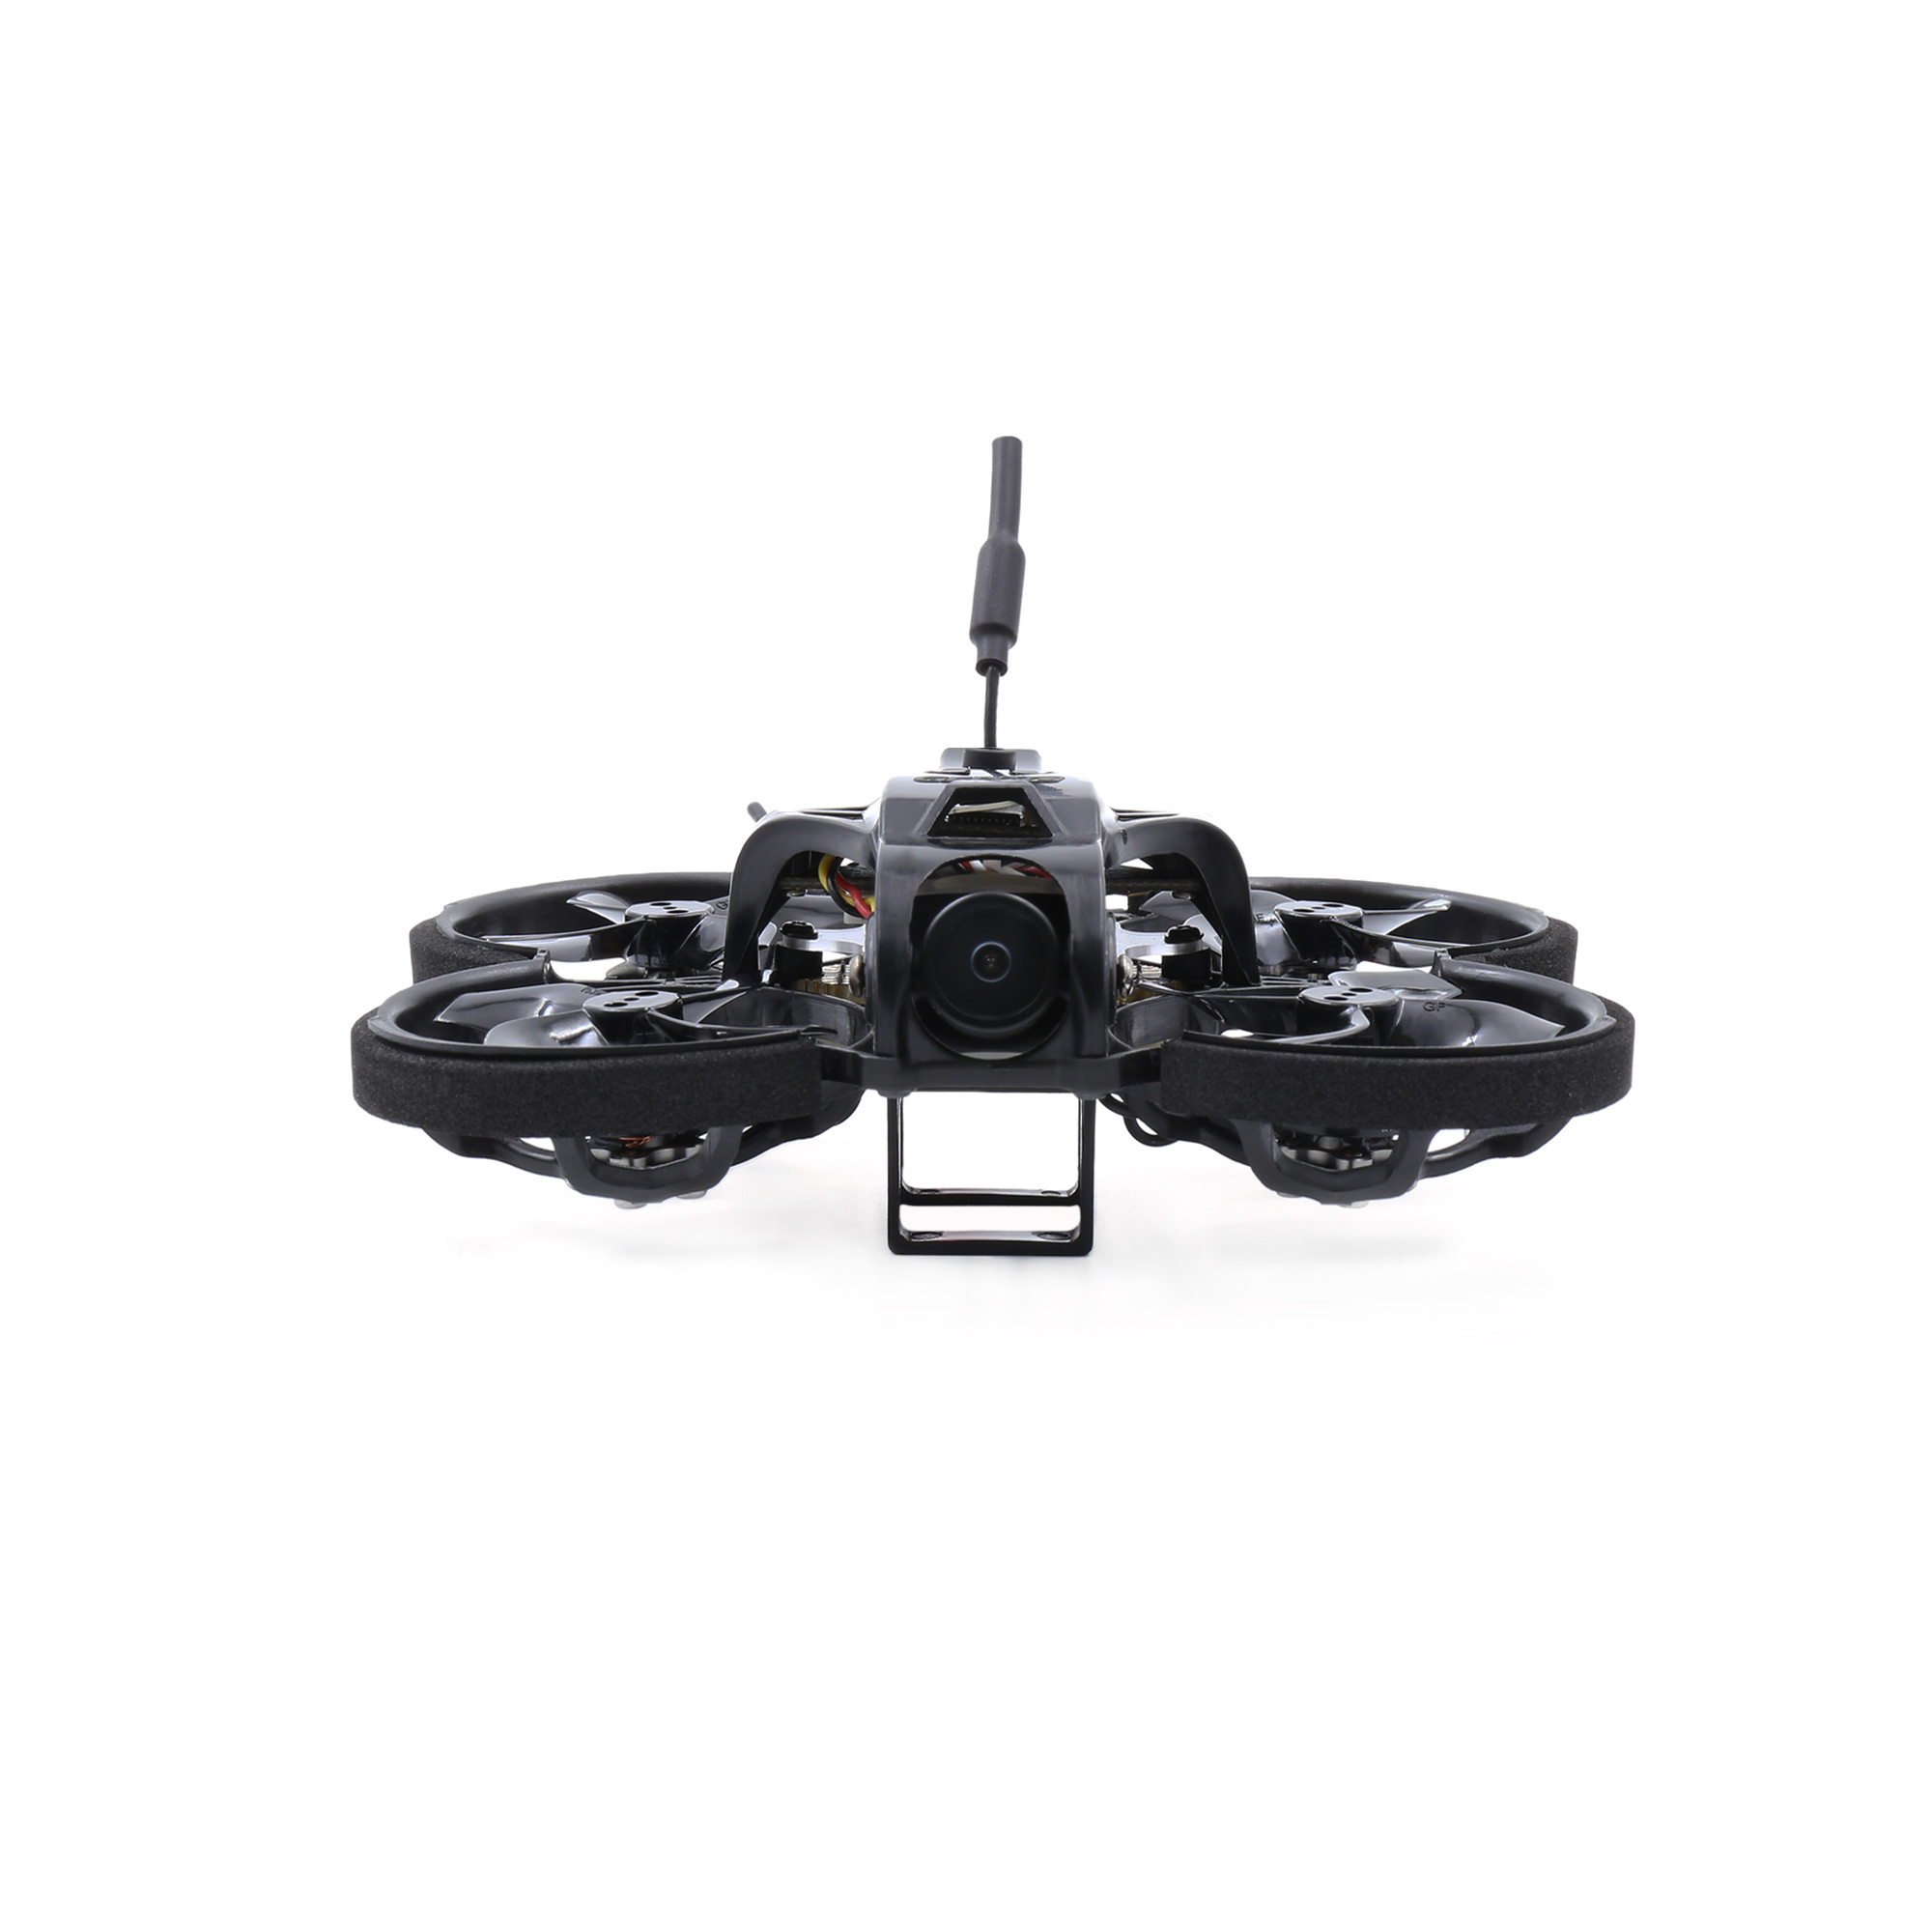 GEPRC-TinyGO-16inch-2S-FPV-Indoor-Whoop-Runcam-Nano2-GR8-Remote-ControllerRG1-Goggles-RTF-Ready-To-F-1788771-7